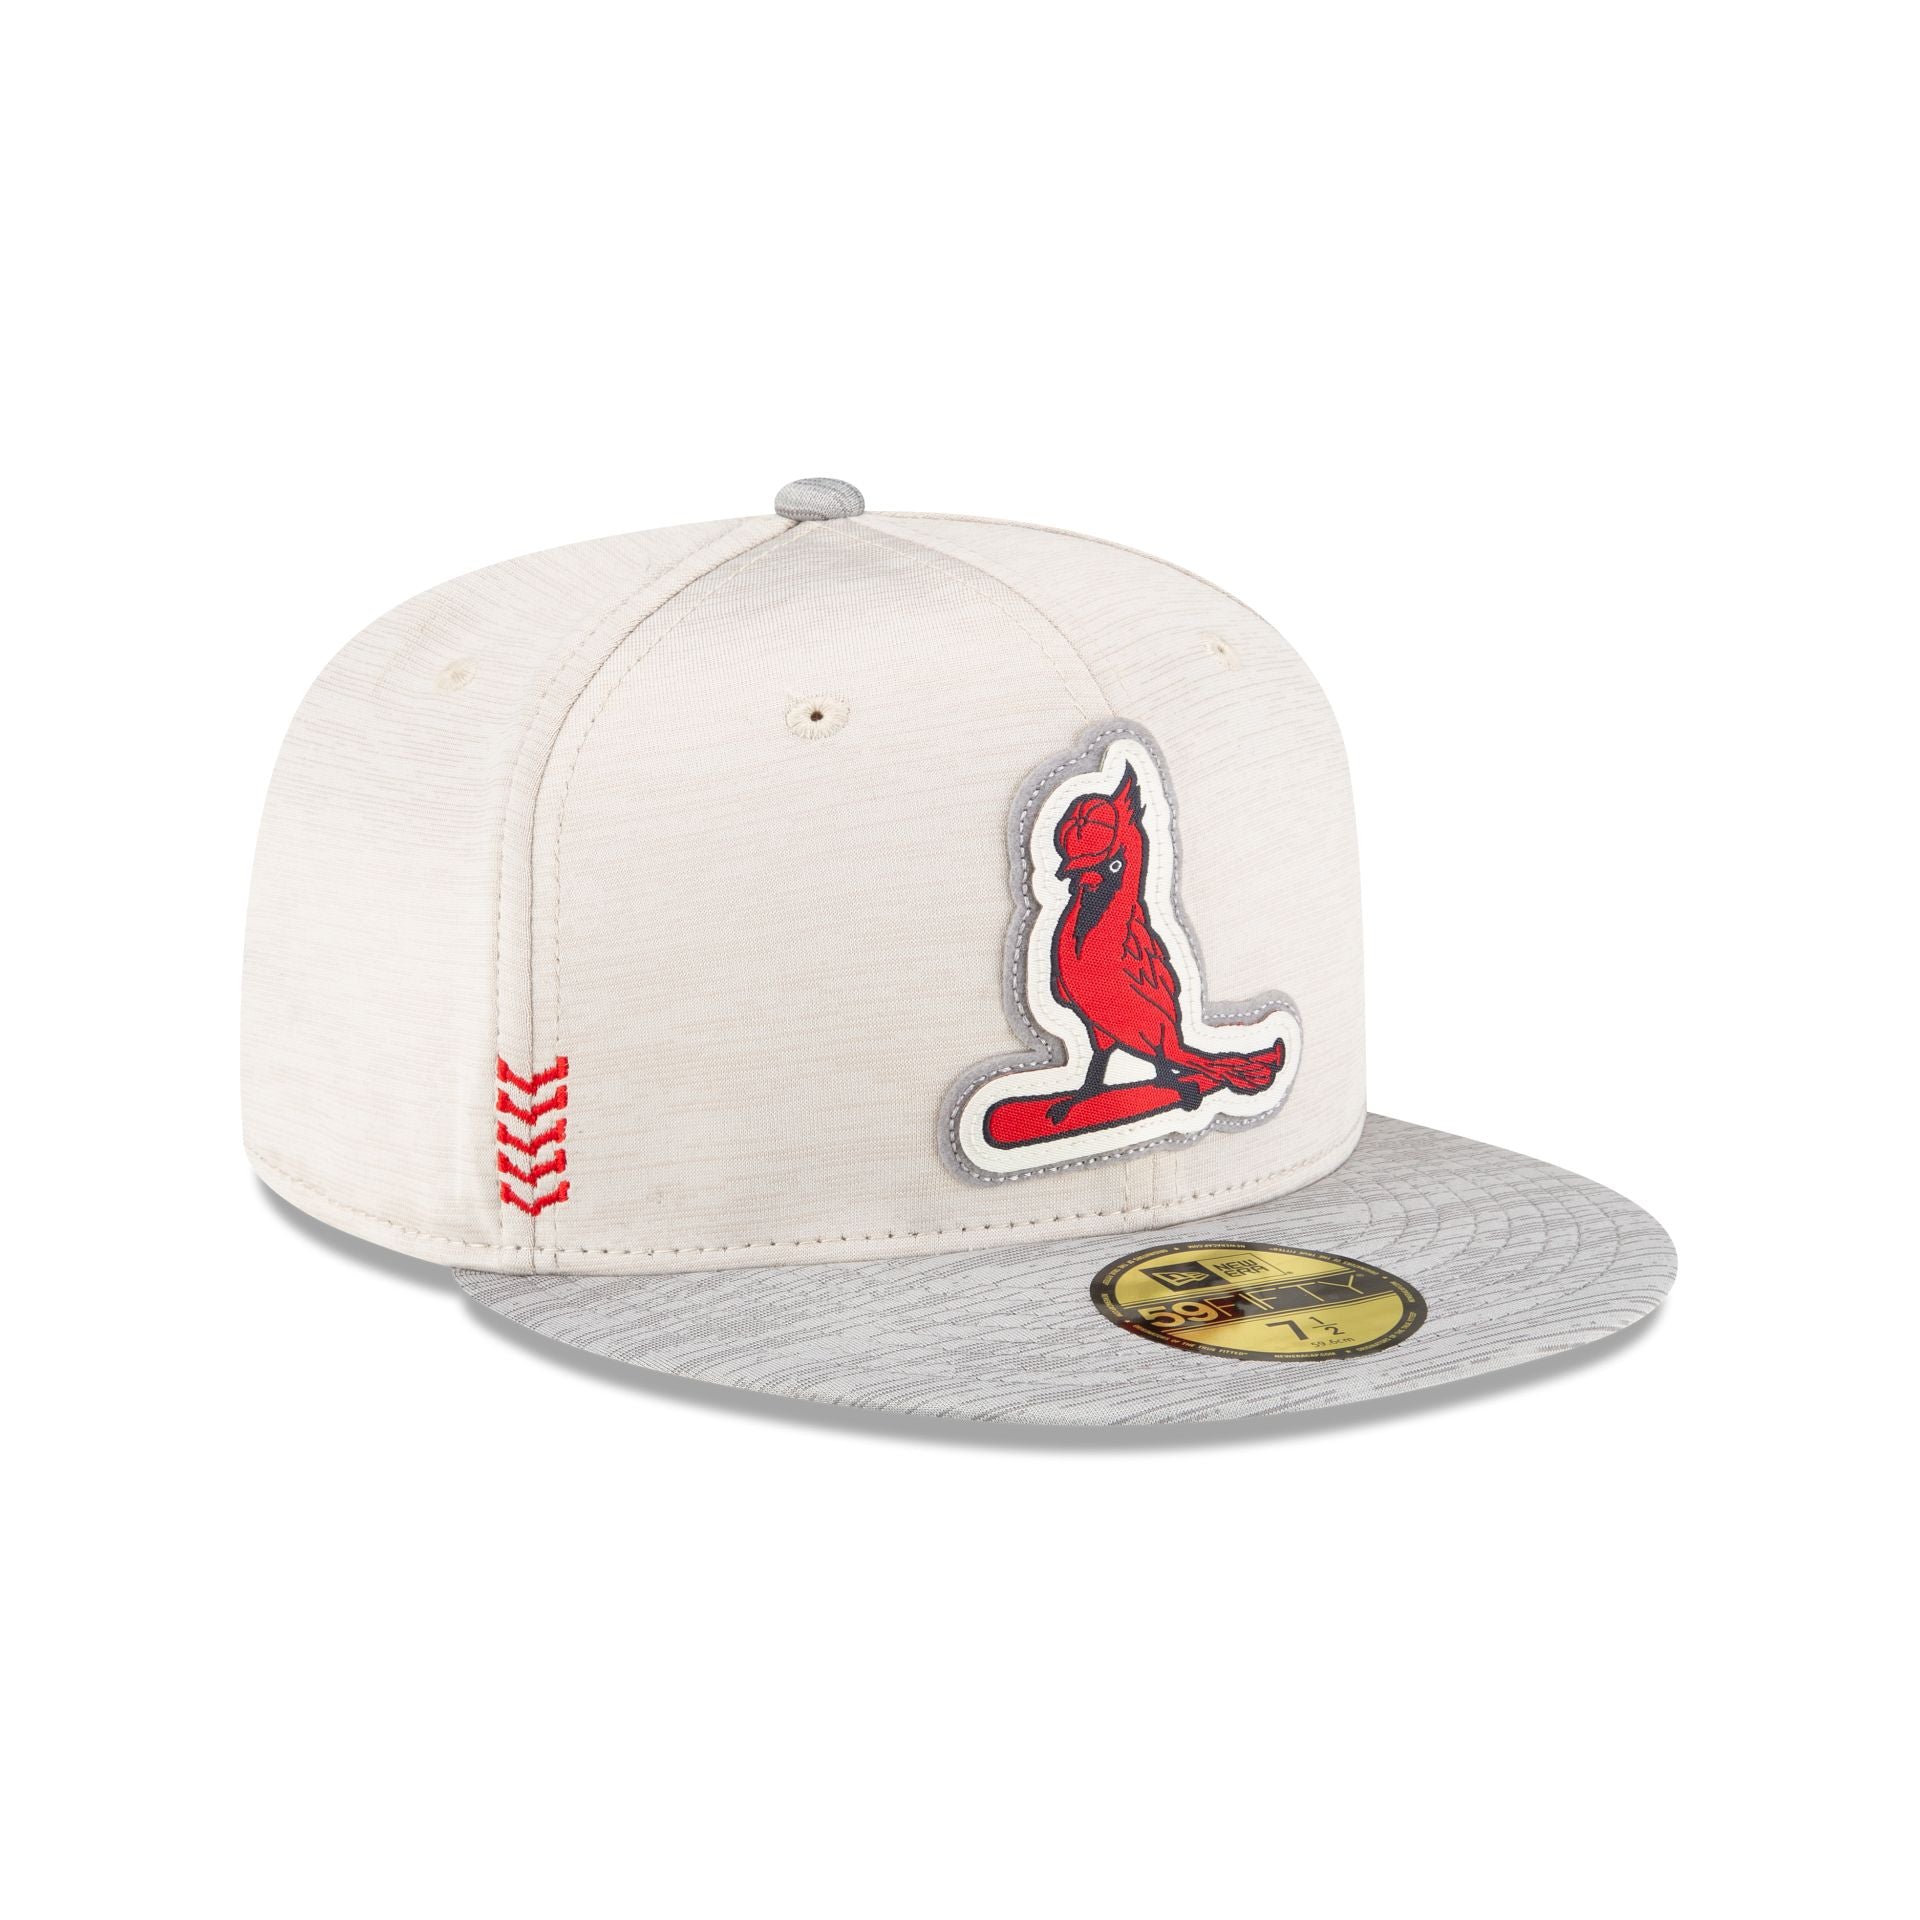 St. Louis Cardinals Custom White Cooperstown Collection Home Jersey